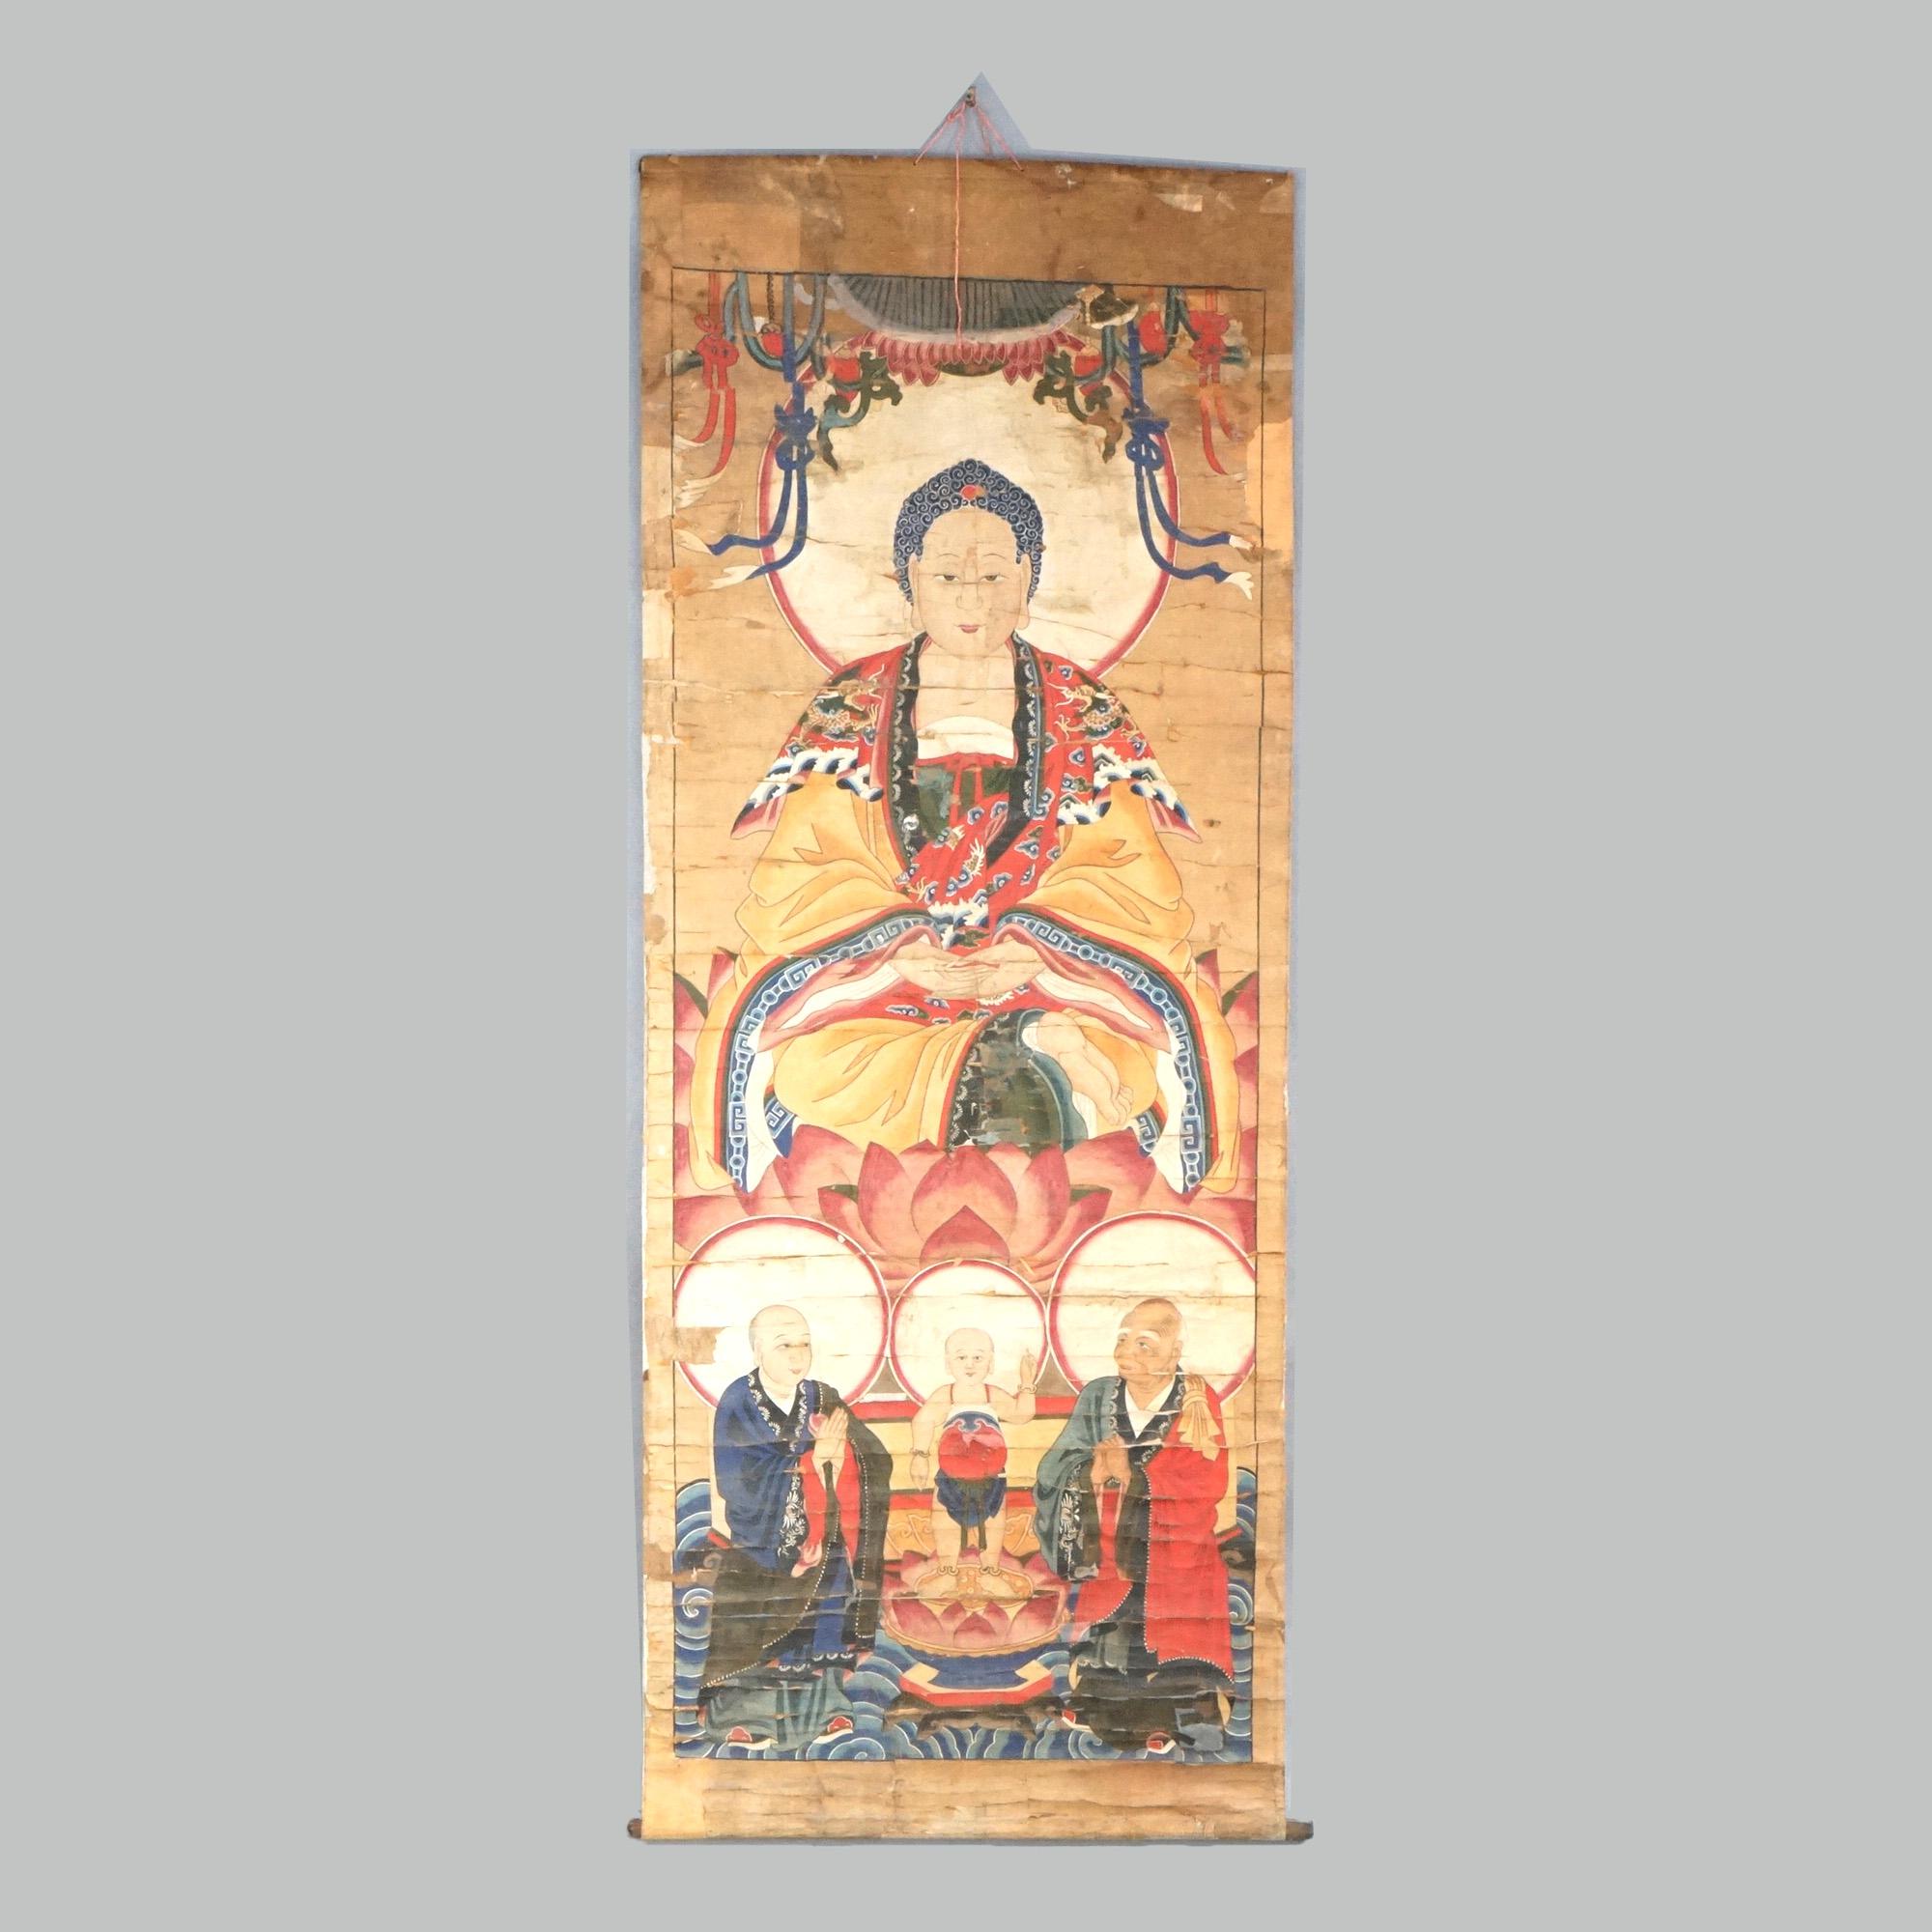 An oversized antique Chinese scroll painting offers depiction of deity with figures, 19th century

Measures - 69